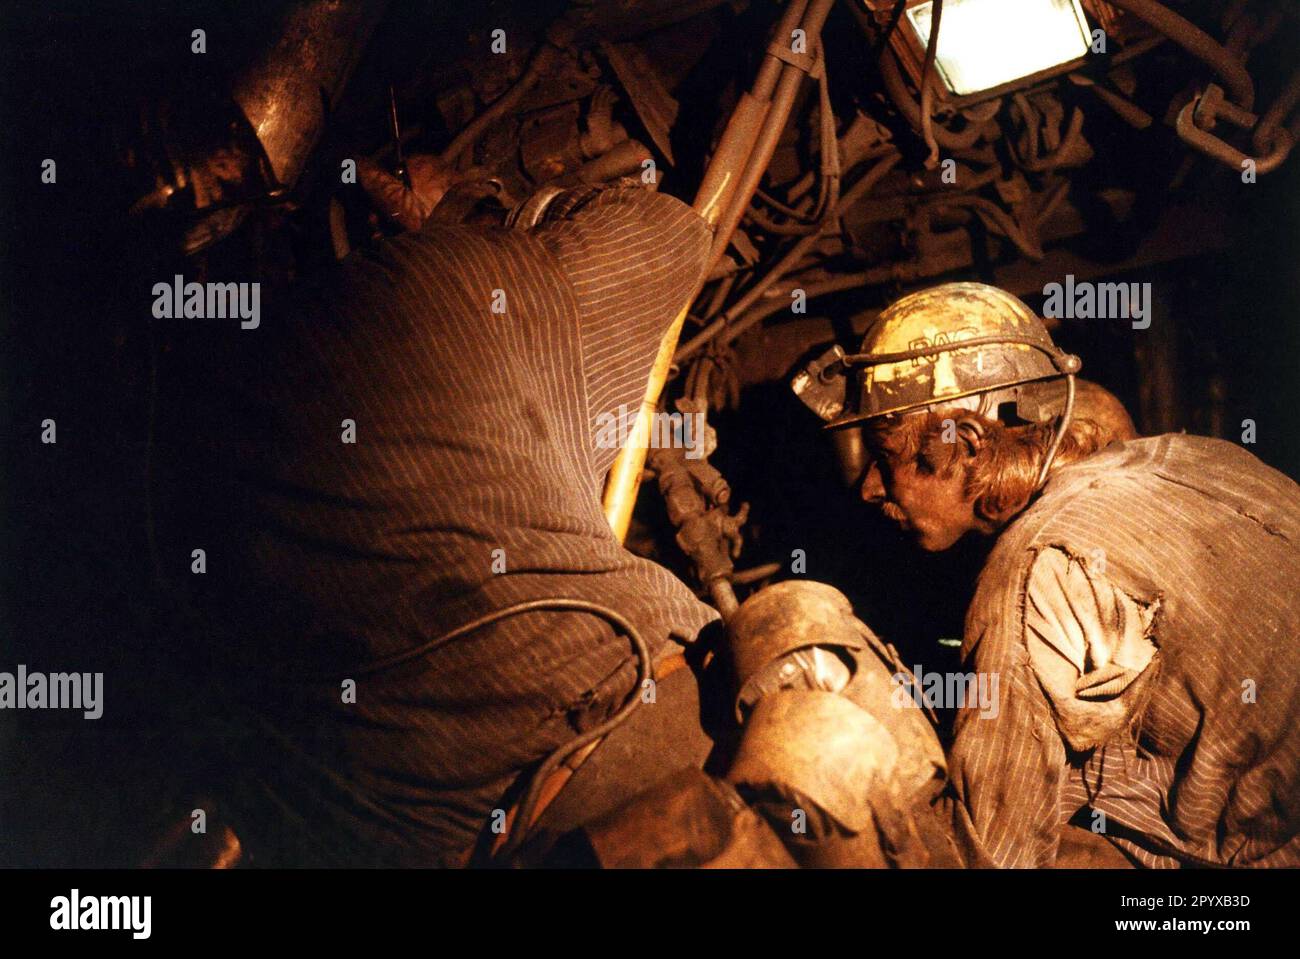 'Date of recording: 15.08.1993 ''Friedrich-Heinrich'' colliery (Ruhrkohle AG): Miner underground at the coal seam, Kamp-Lintfort. [automated translation]' Stock Photo